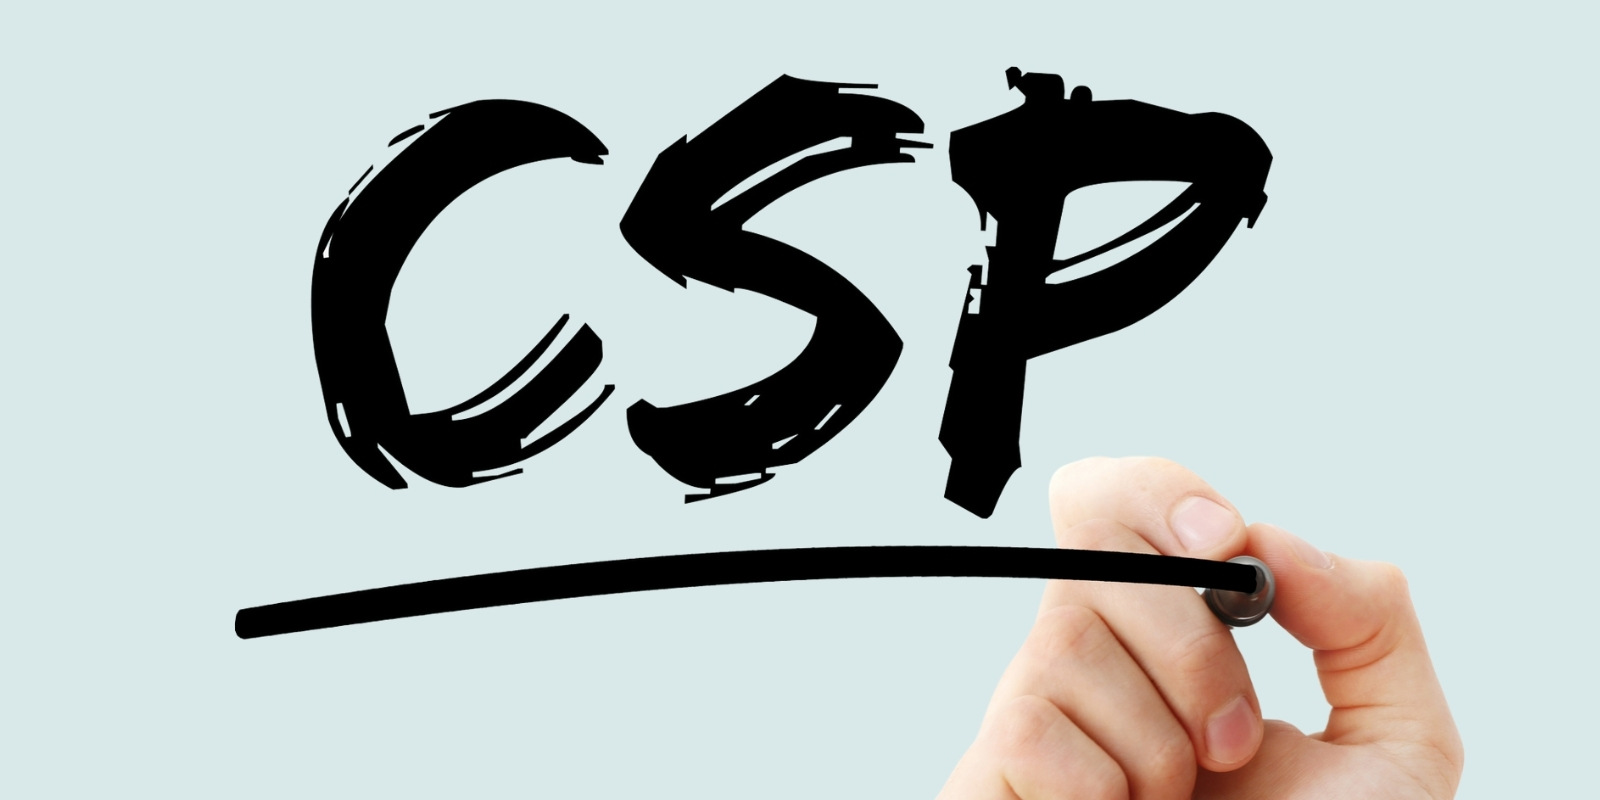 CSP and Licensing Course